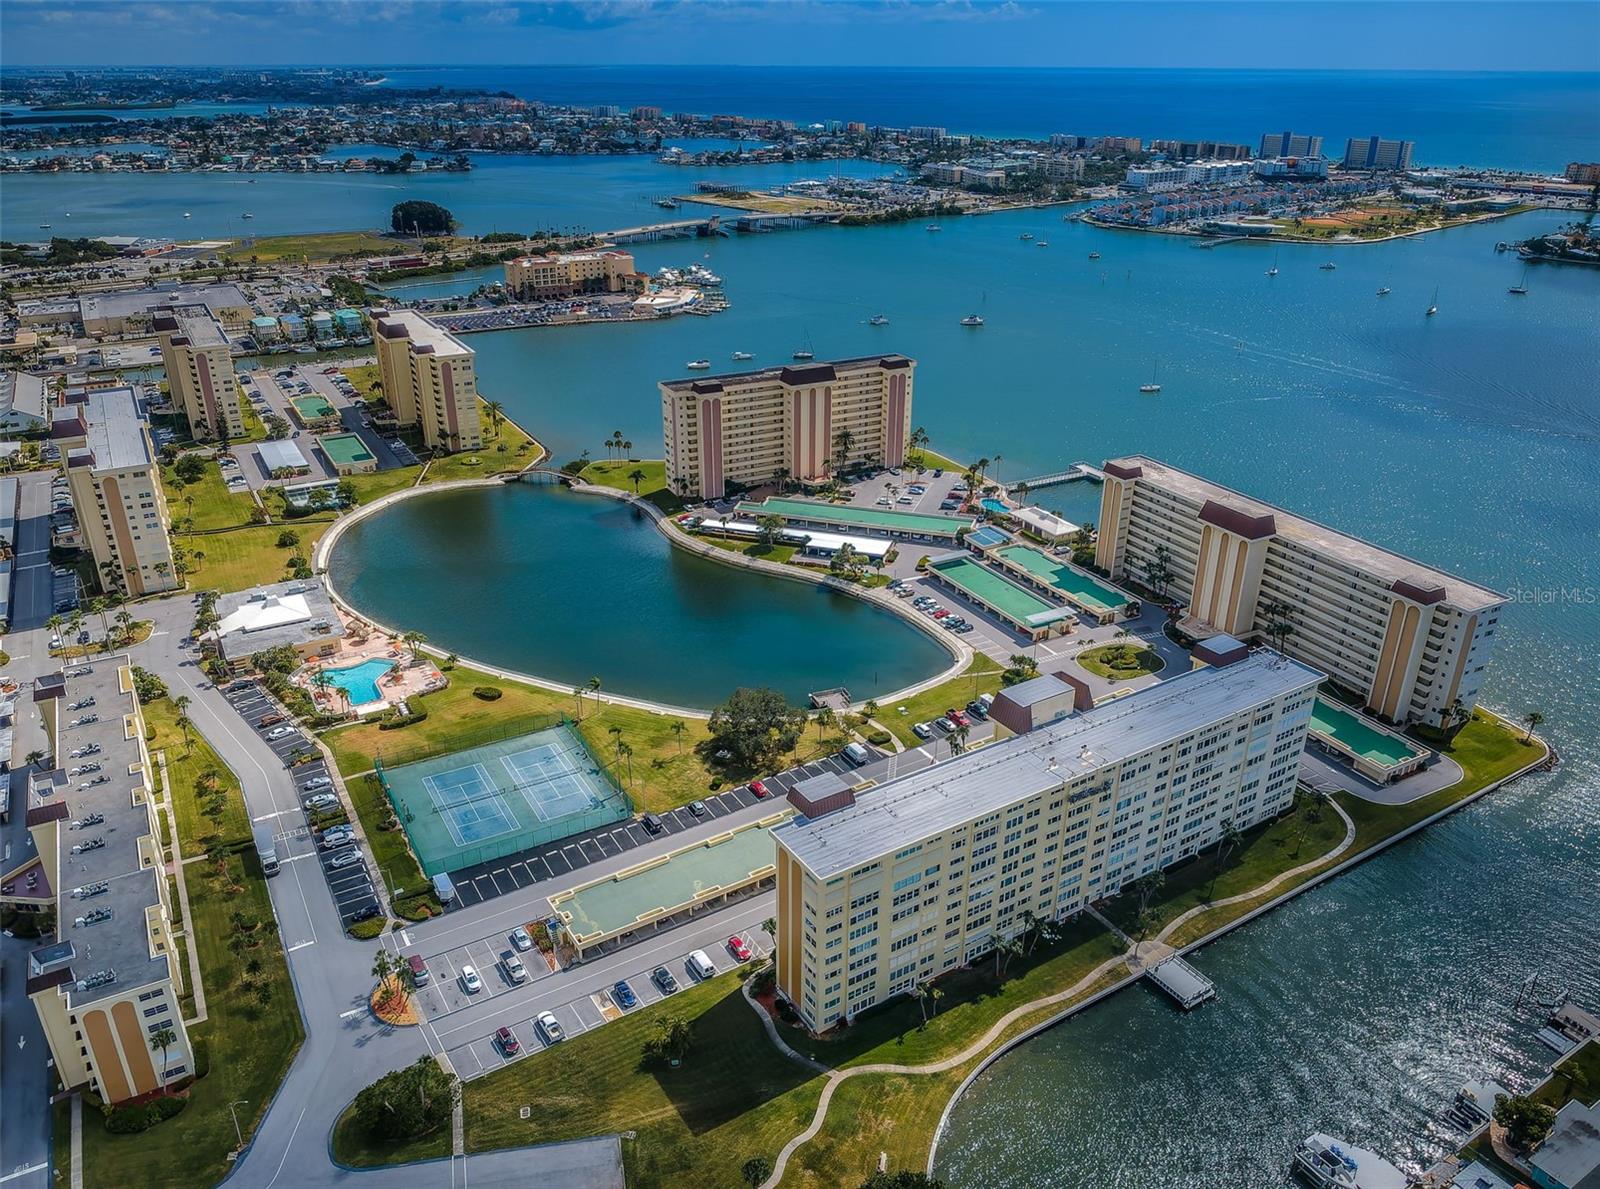 .. The Sea Towers Resort Community Consists of 7 Buildings That Share Common Grounds. Very Active Young 55+ Community. Wonderful Aerial of Surrounding Water.